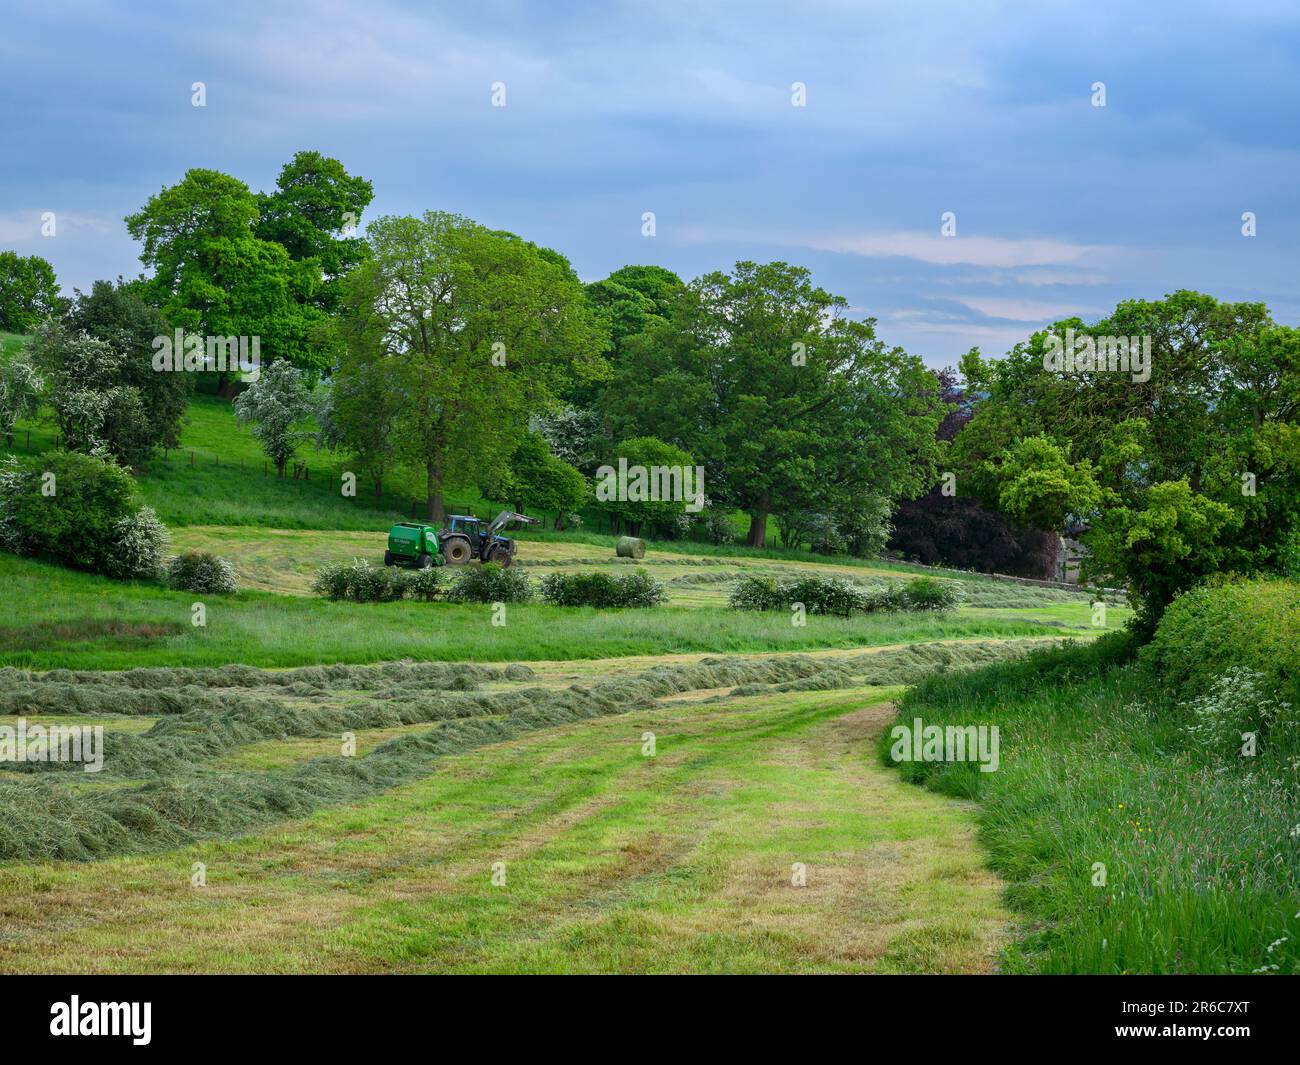 Haymaking (Valmet tractor being driven in field pulling McHale F5400 baler, collecting dry grass, 1 one round bale) - Leathley, Yorkshire England, UK. Stock Photo